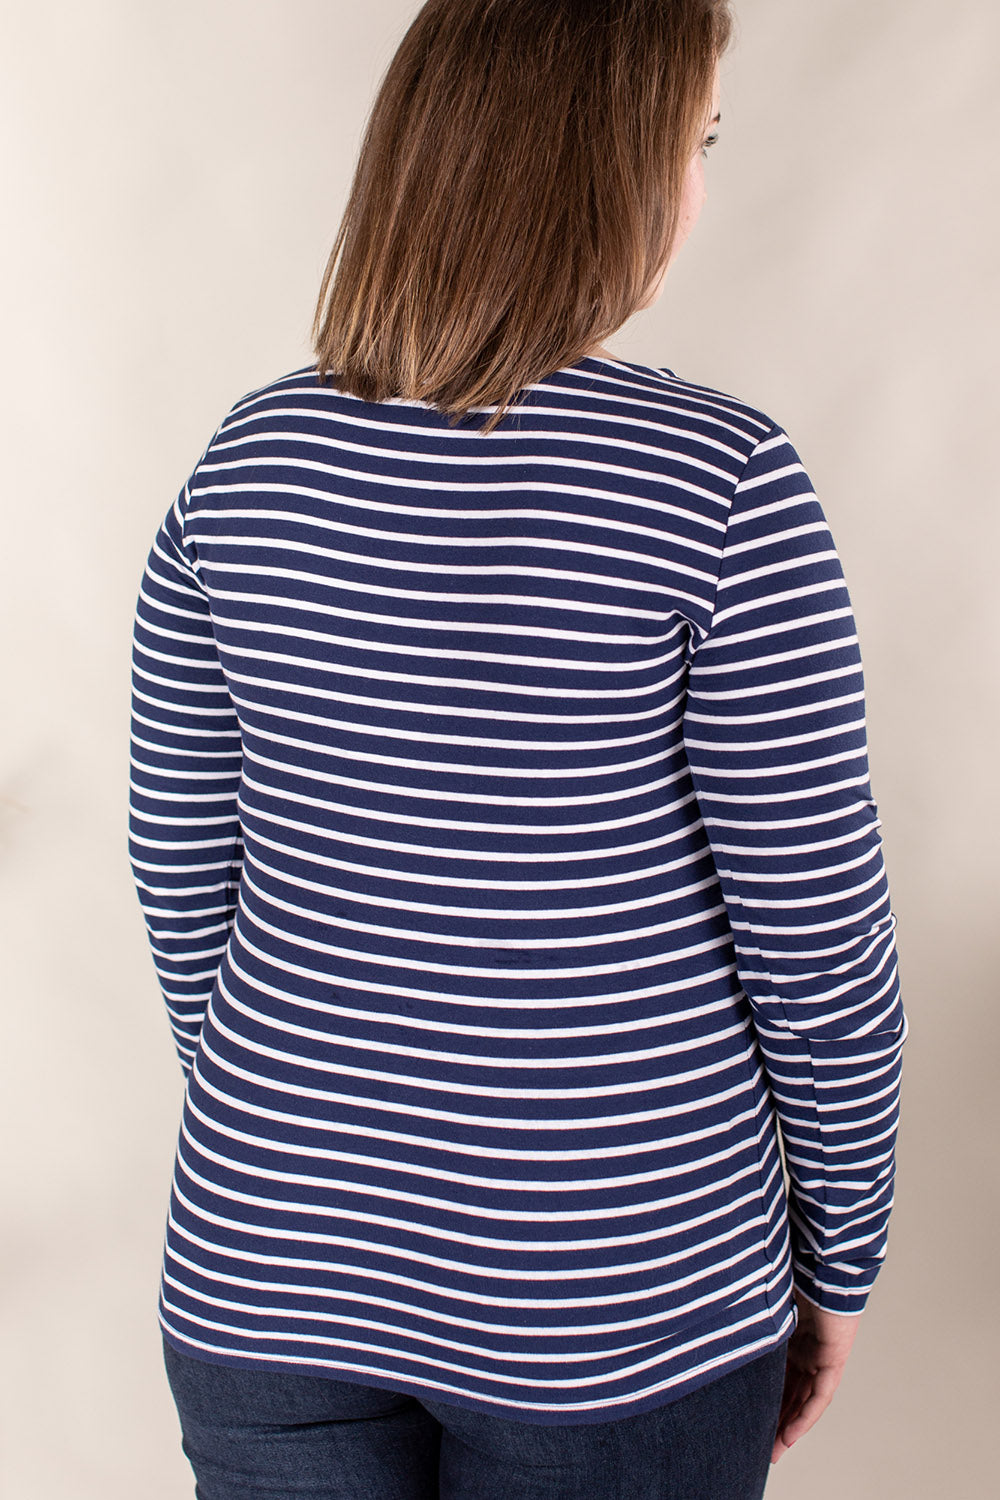 Organic Long Sleeve Breastfeeding Top in Navy with White Stripes *PreLoved*